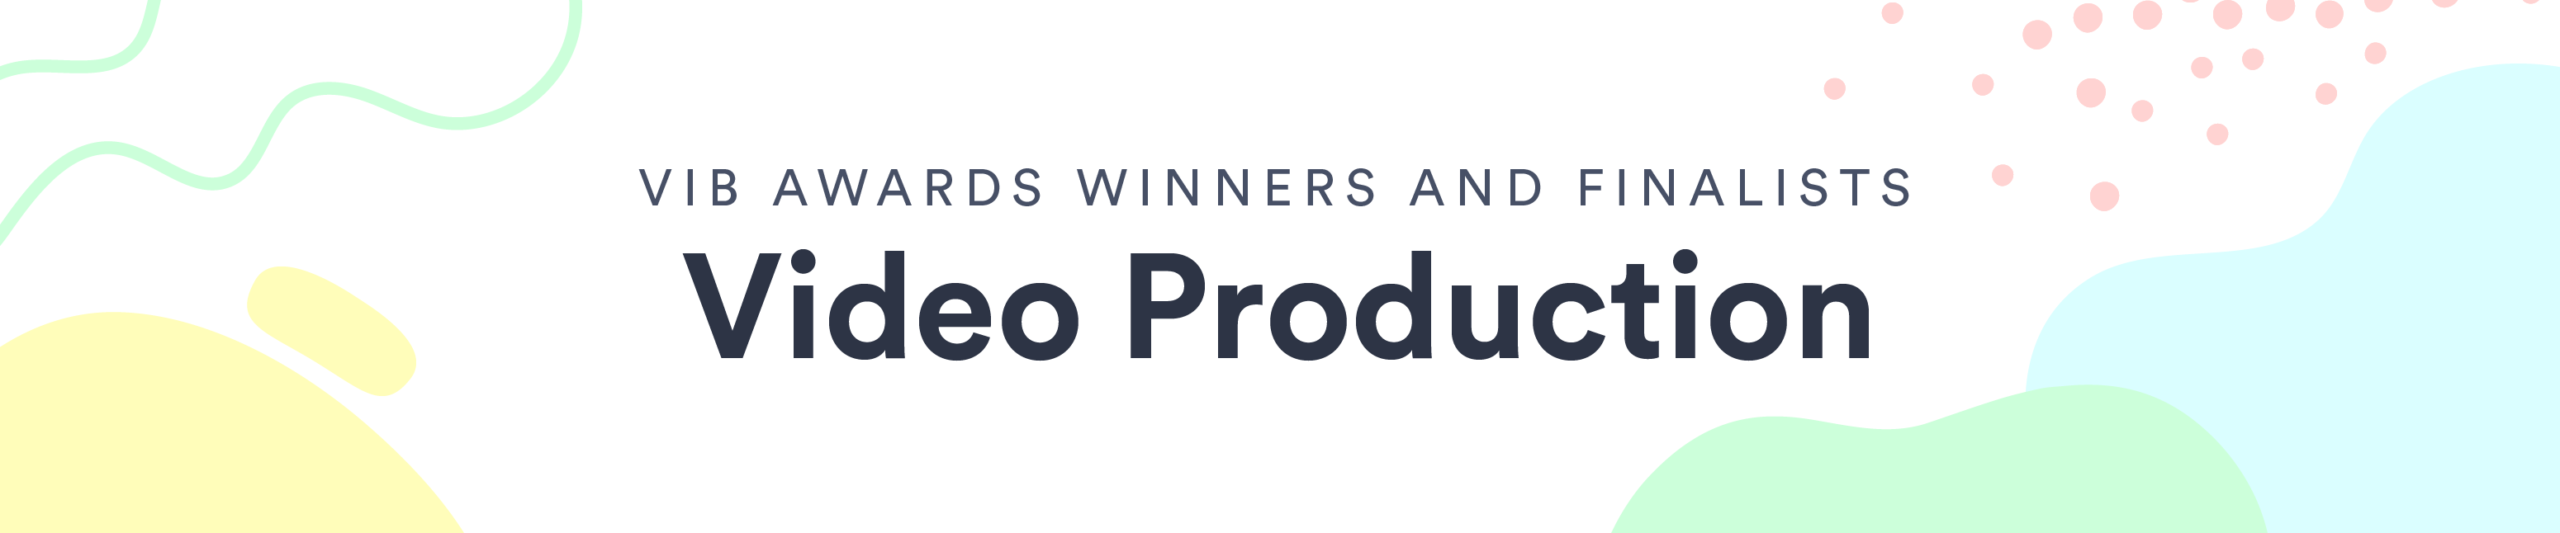 Video in Business Awards: Video Production Winners and Finalists